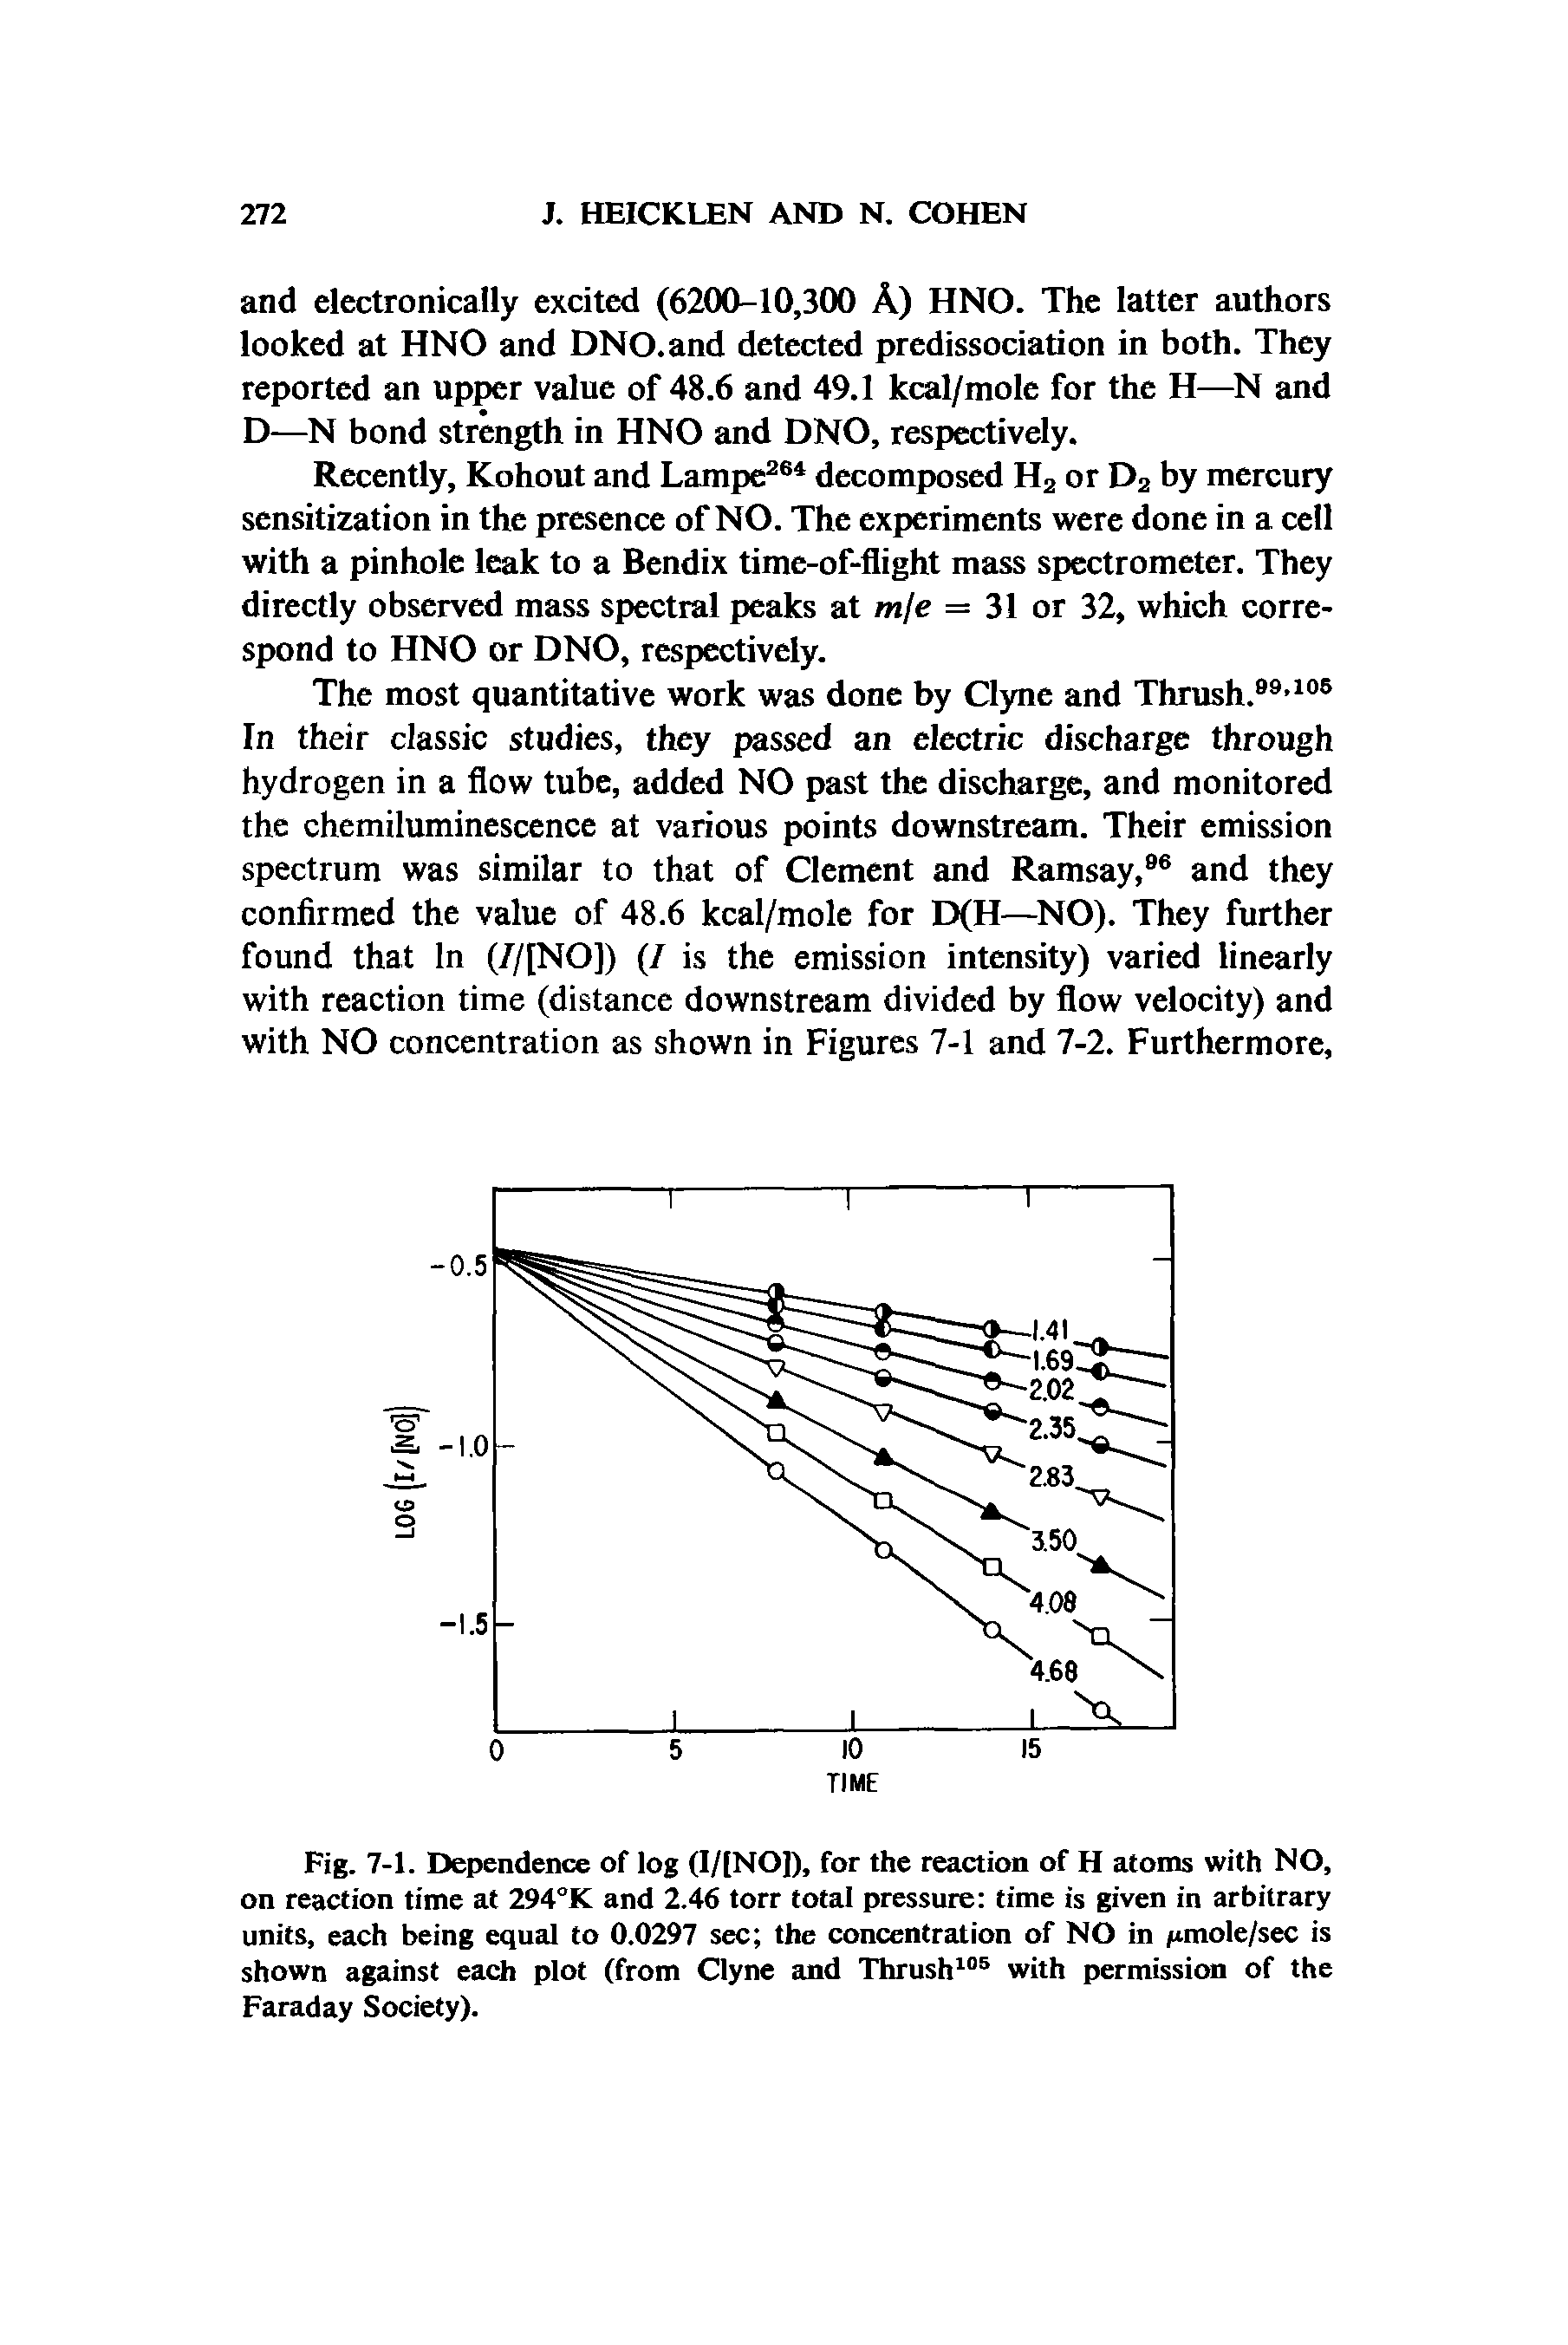 Fig. 7-1. Dependence of log (I/[NO]), for the reaction of H atoms with NO, on reaction time at 294°K and 2.46 torr total pressure time is given in arbitrary units, each being equal to 0.0297 sec the concentration of NO in nmole/sec is shown against each plot (from Clyne and Thrush105 with permission of the Faraday Society).